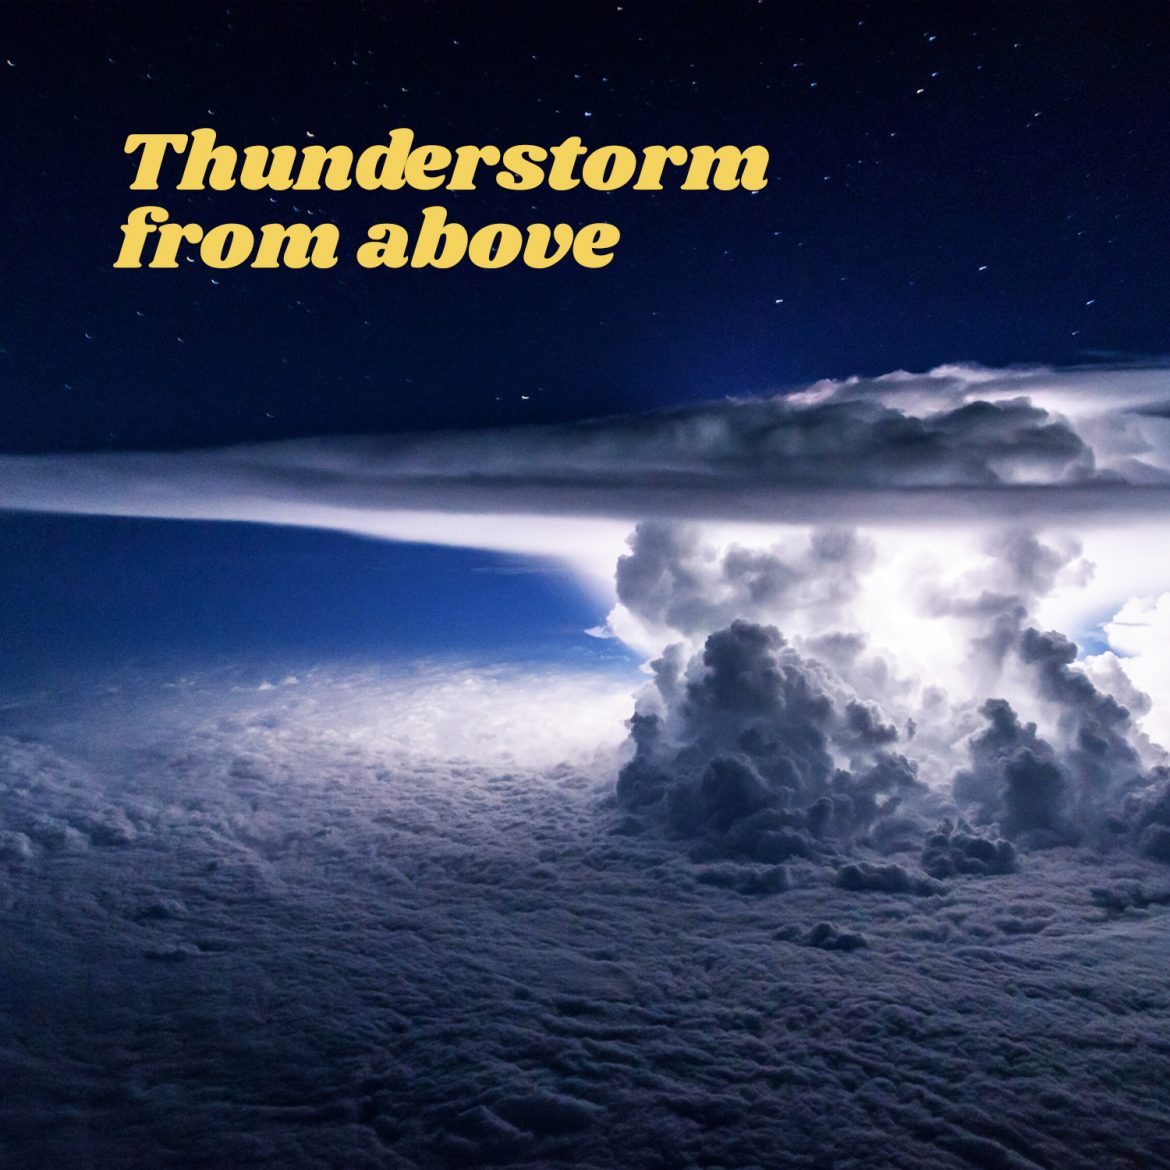 Thunderstorm from above